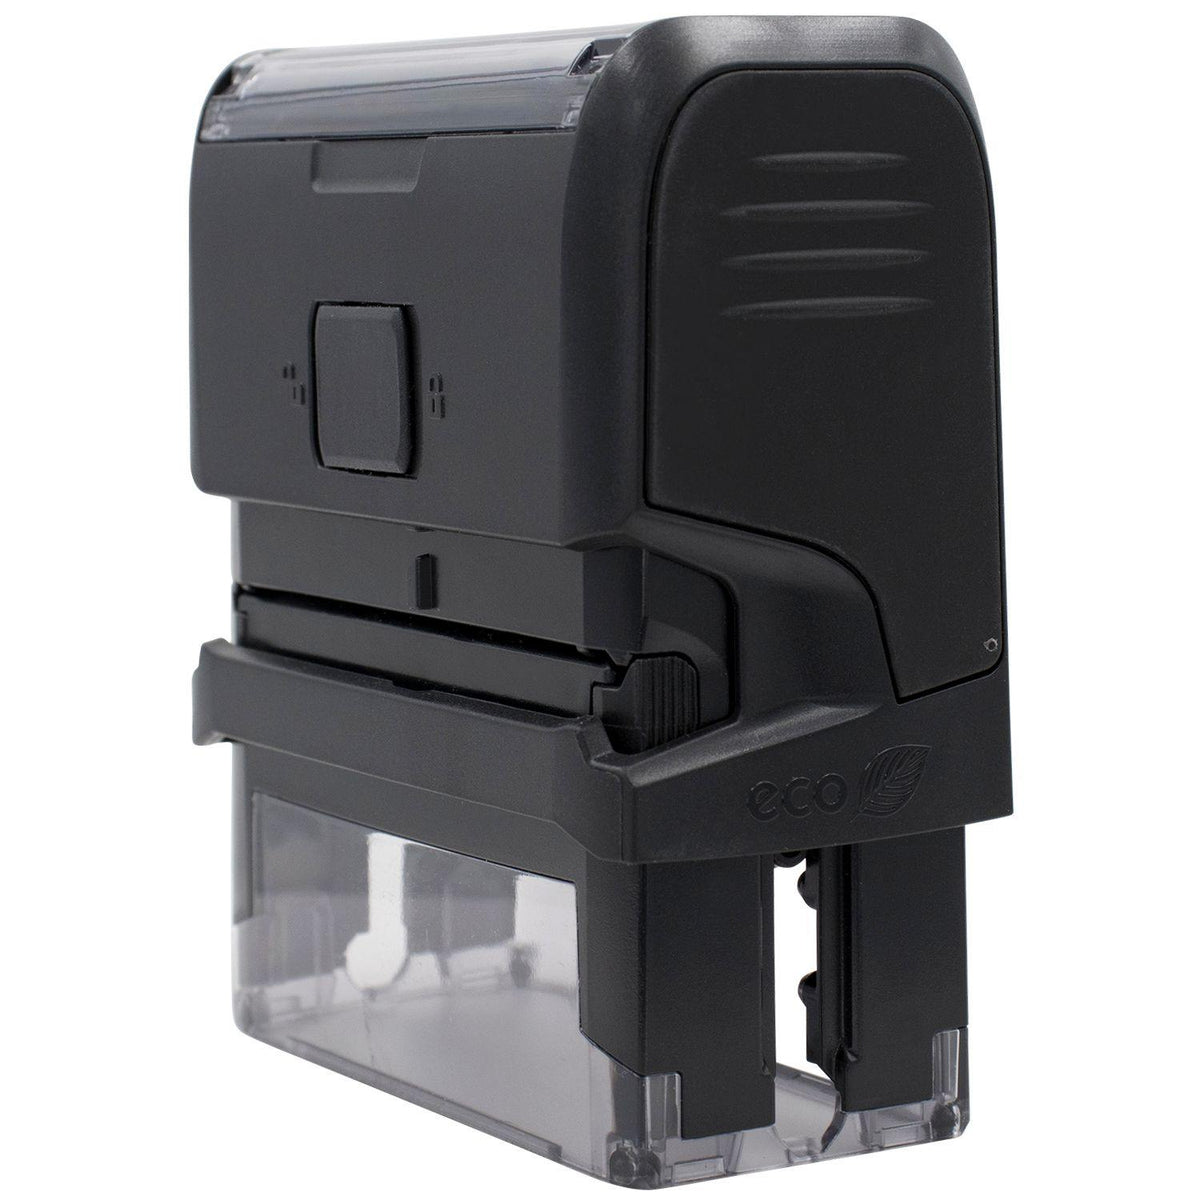 Large Self-Inking Social Distancing Stamp - Engineer Seal Stamps - Brand_Trodat, Impression Size_Large, Stamp Type_Self-Inking Stamp, Type of Use_Medical Office